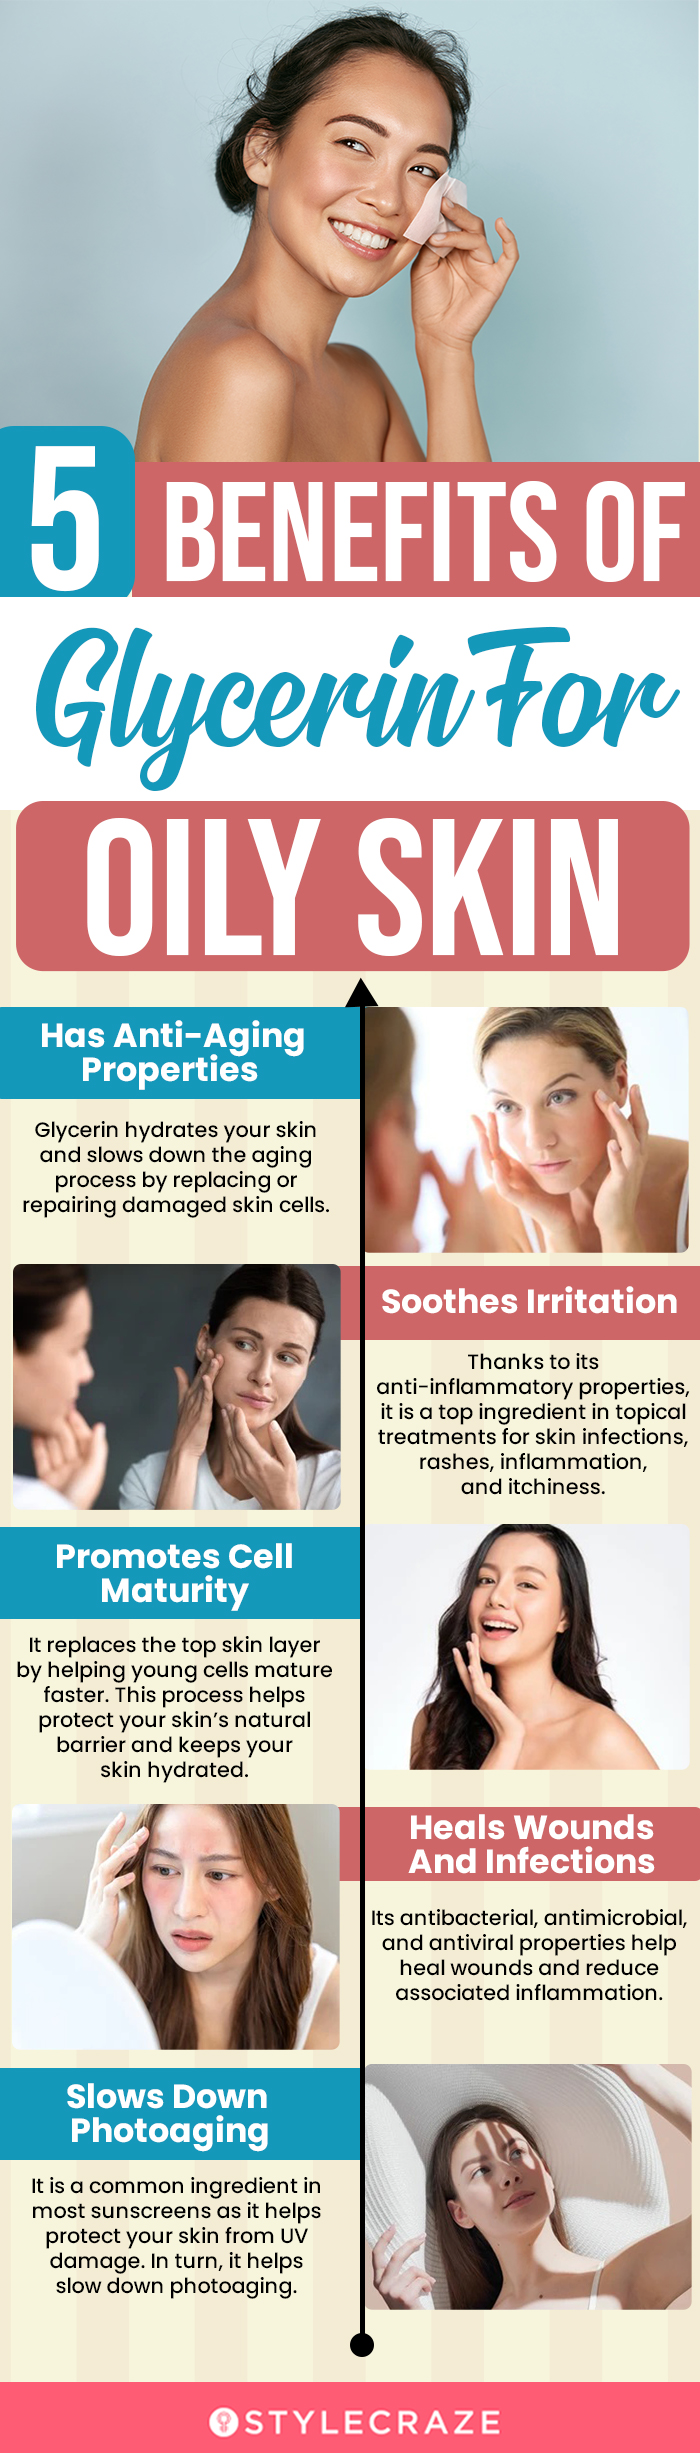 5 benefits of glycerin for oily skin (infographic)